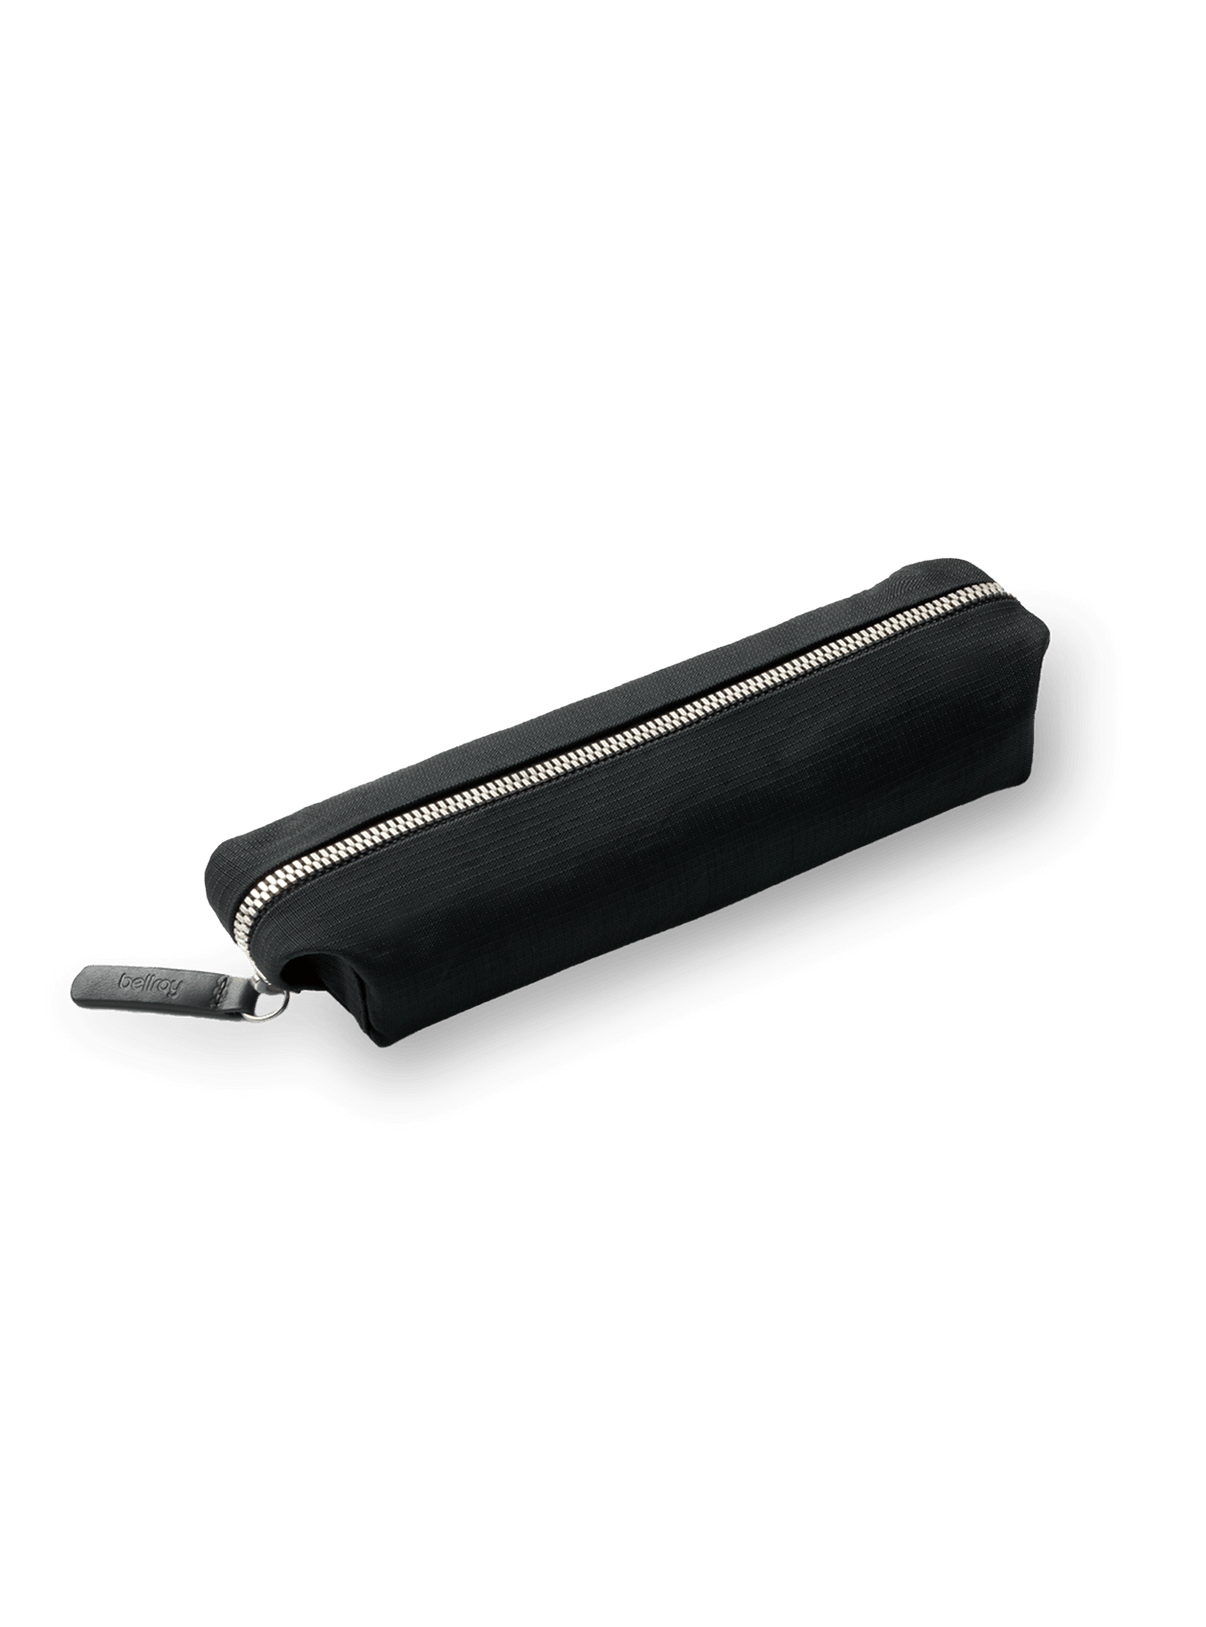 Bellroy Pencil Case product image zipped || Midnight